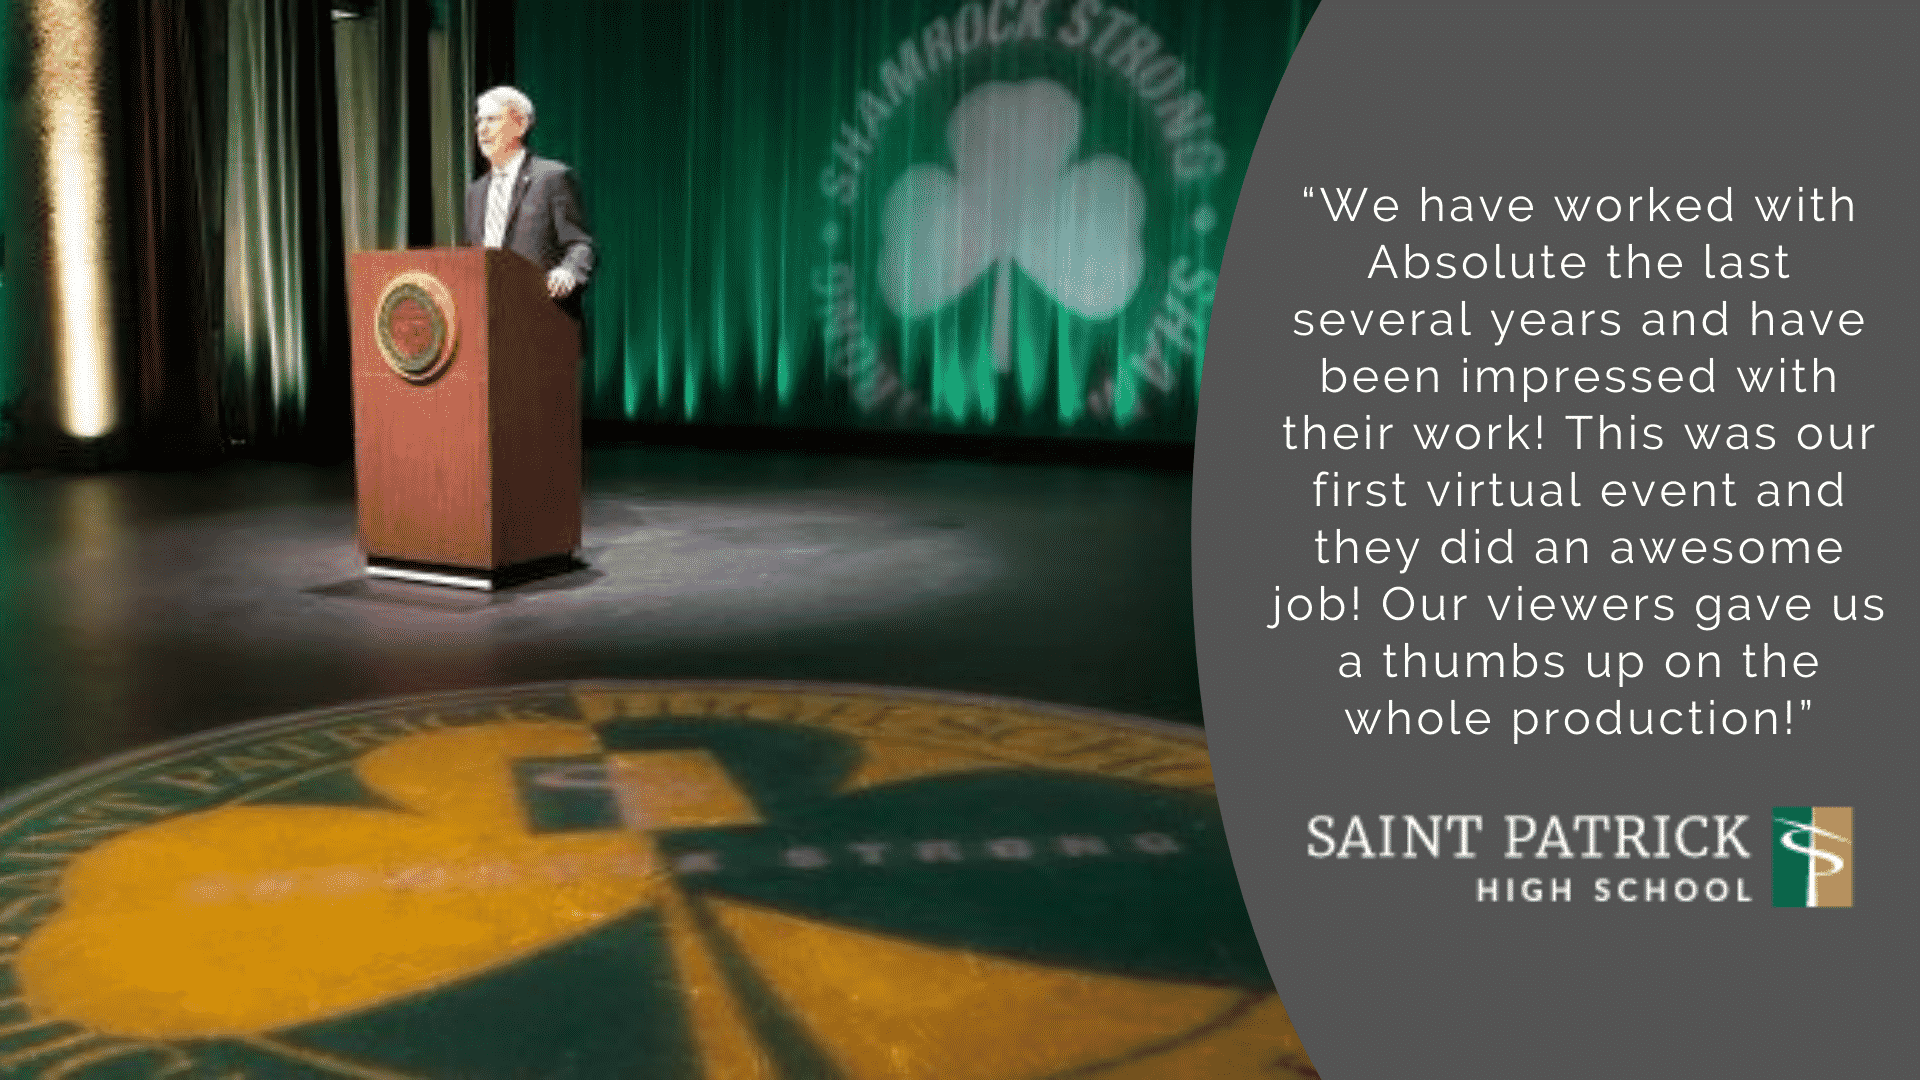 See how Saint Patrick High School took their annual Green and Gold Gala virtual without skipping a beat!